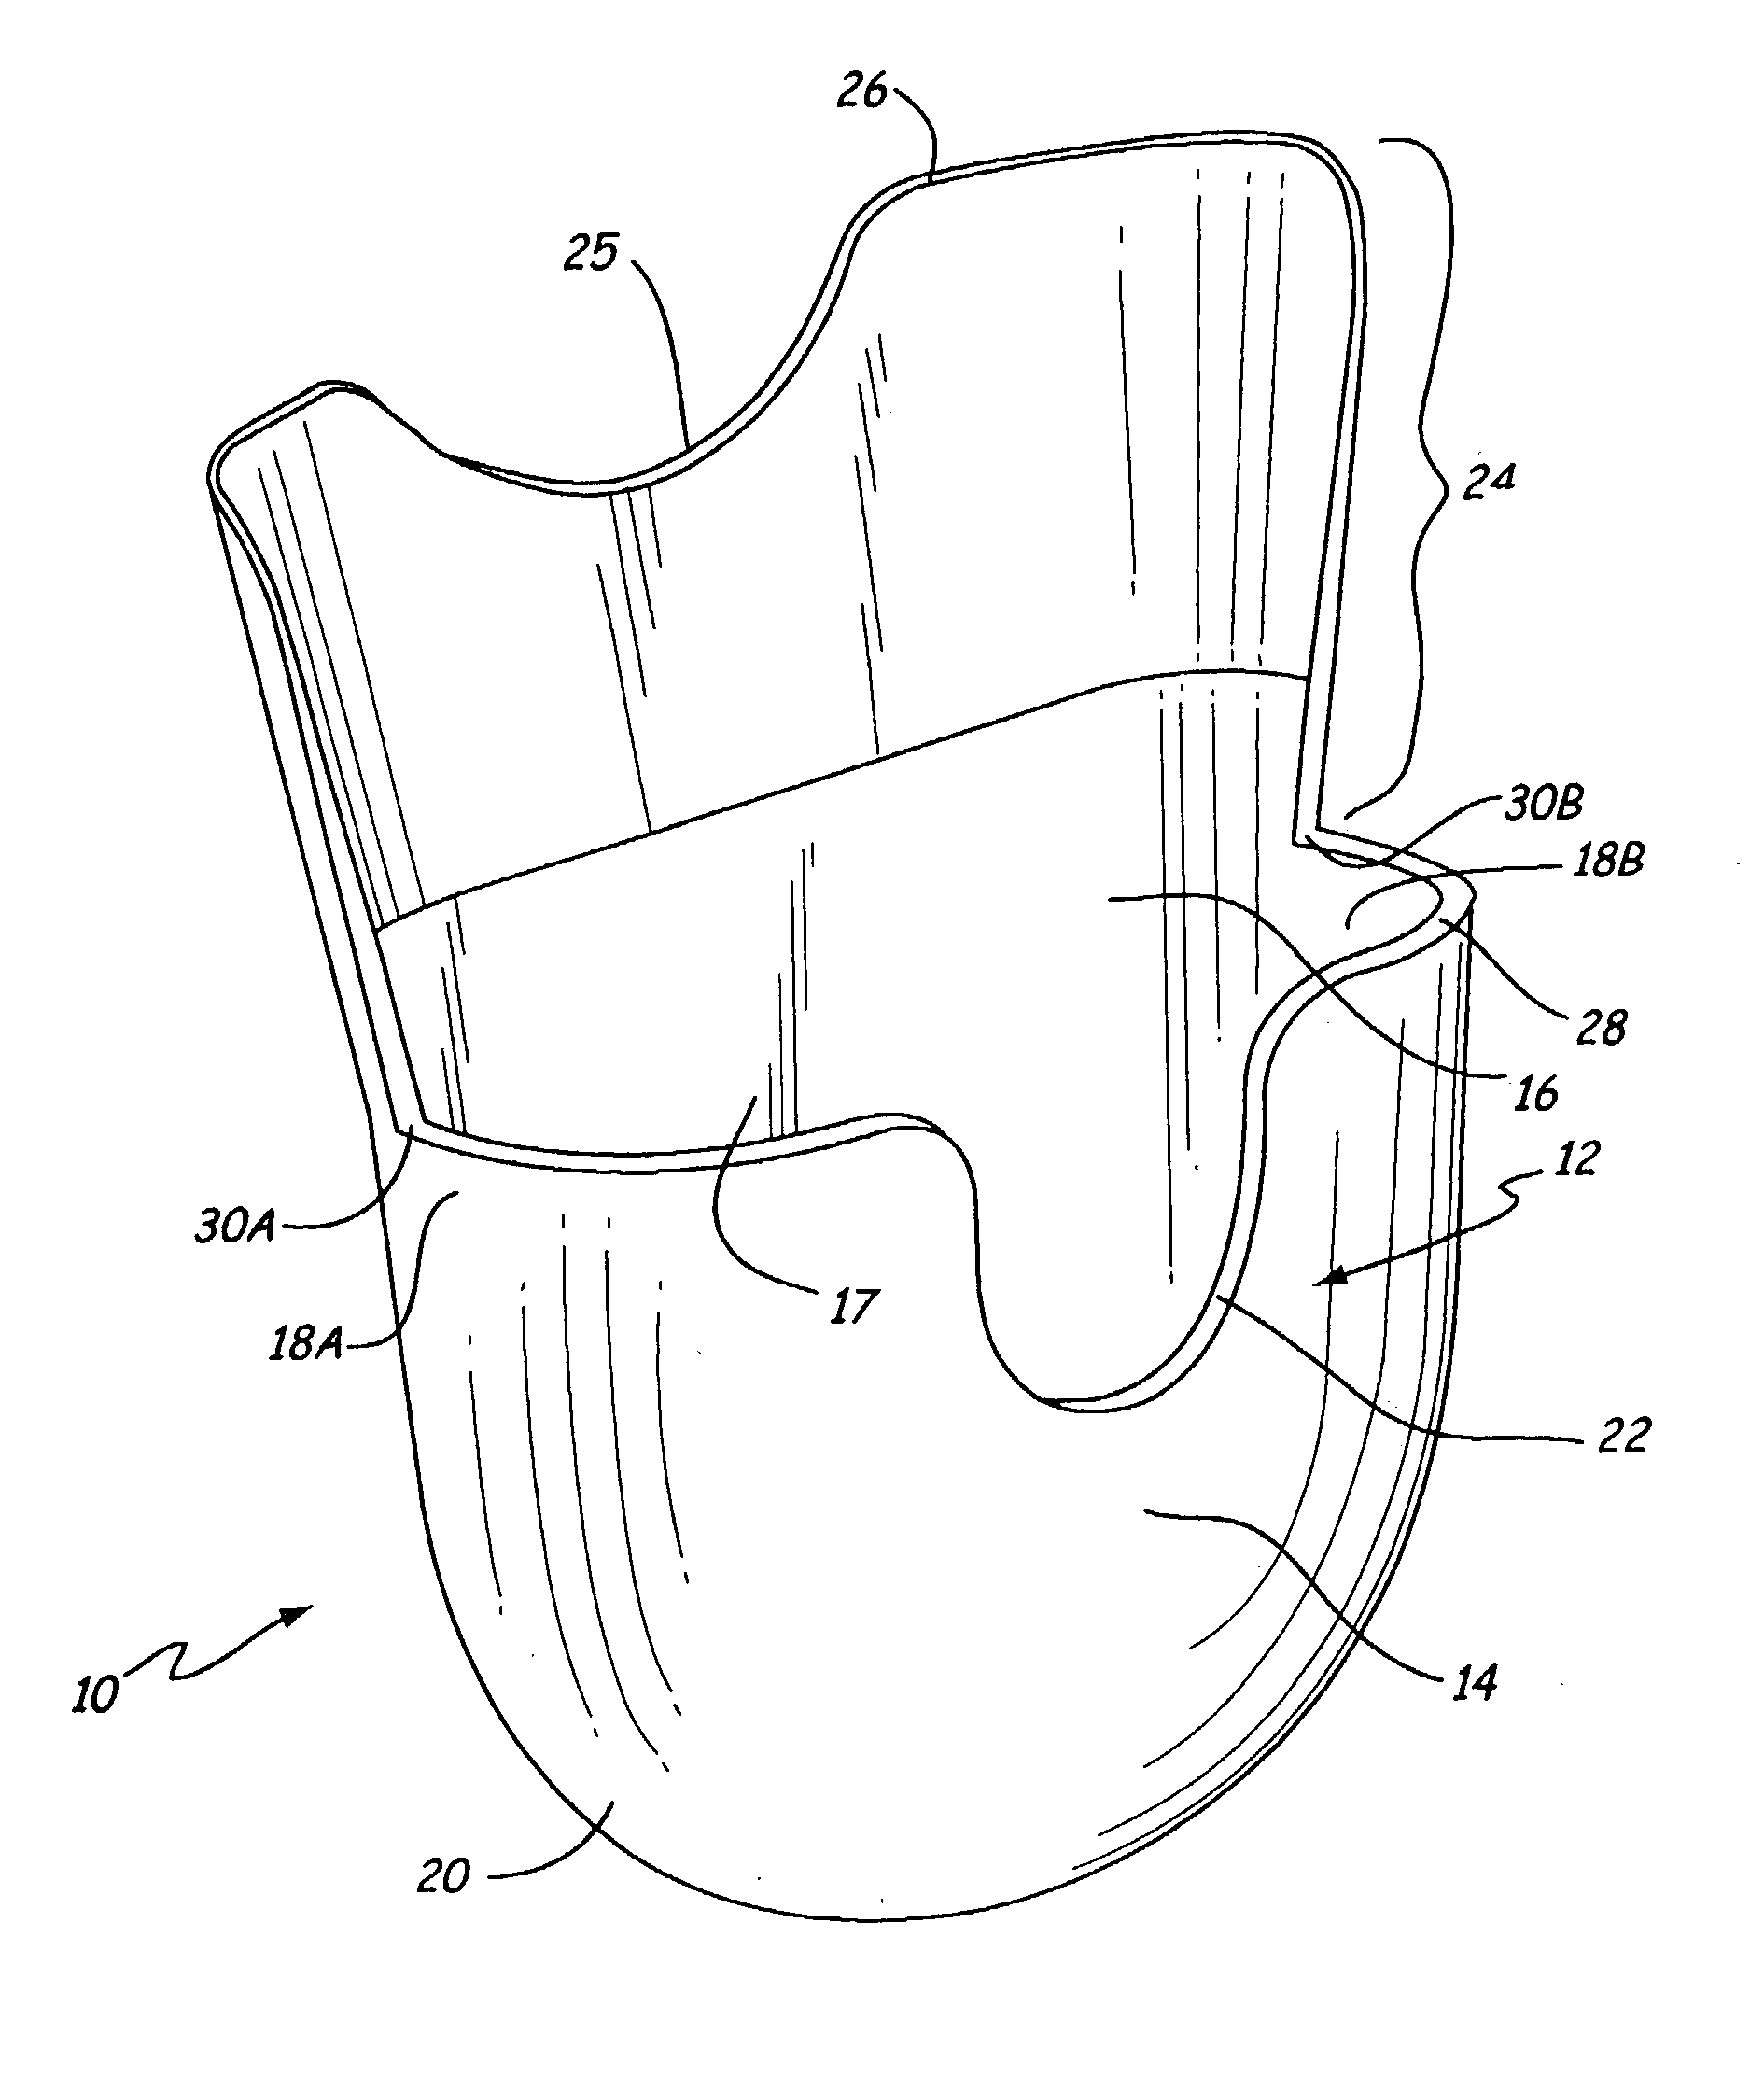 Device and method for collecting surgical material